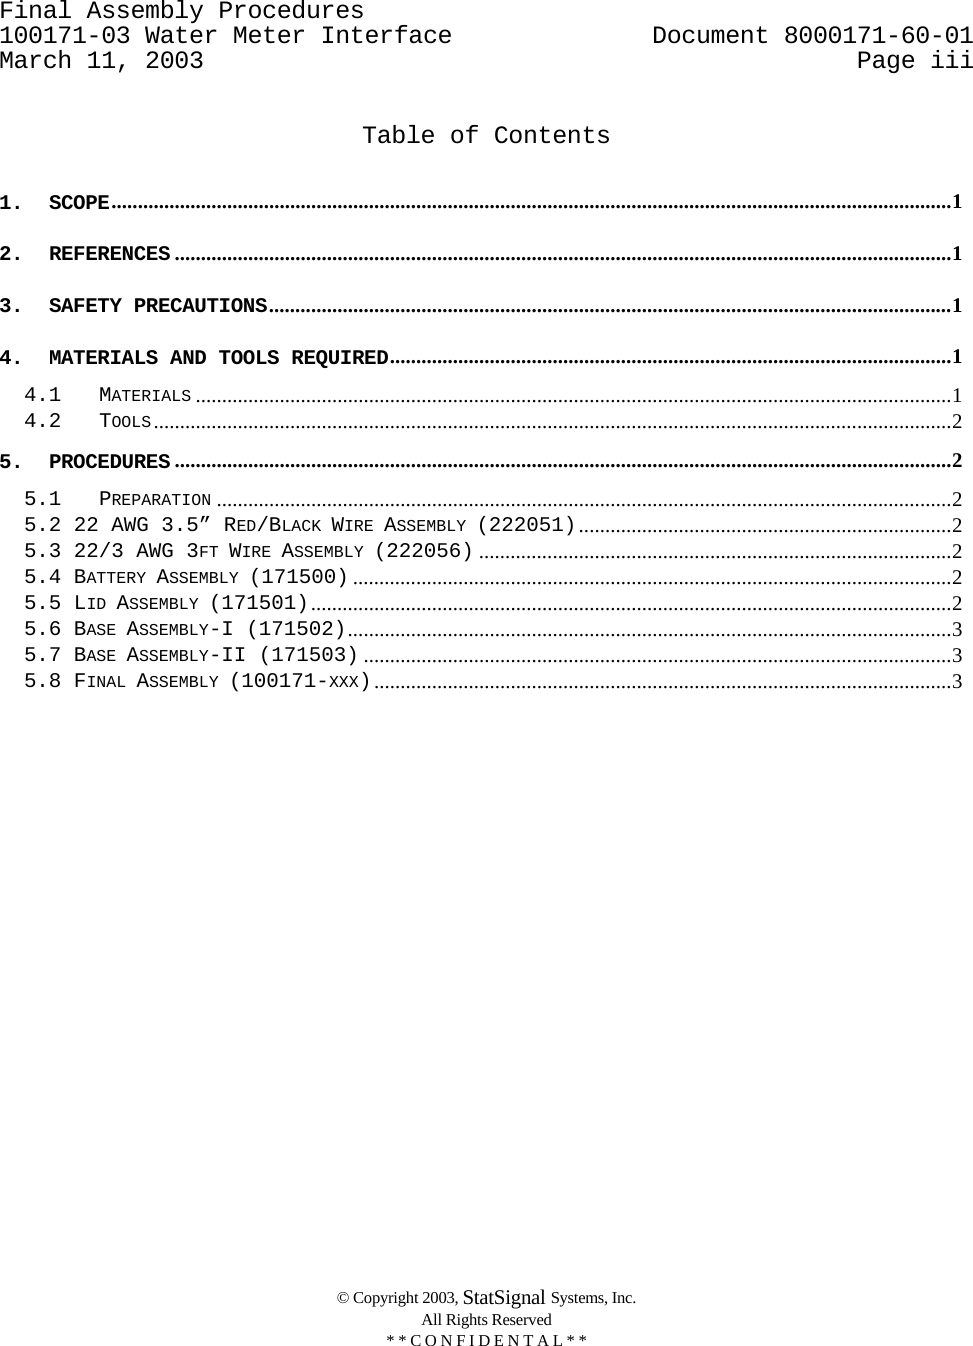 Final Assembly Procedures      100171-03 Water Meter Interface   Document 8000171-60-01 March 11, 2003  Page iii    © Copyright 2003, StatSignal Systems, Inc.   All Rights Reserved   * * C O N F I D E N T A L * *    Table of Contents  1. SCOPE................................................................................................................................................................1 2. REFERENCES ....................................................................................................................................................1 3. SAFETY PRECAUTIONS..................................................................................................................................1 4. MATERIALS AND TOOLS REQUIRED...........................................................................................................1 4.1 MATERIALS ................................................................................................................................................1 4.2 TOOLS........................................................................................................................................................2 5. PROCEDURES ....................................................................................................................................................2 5.1 PREPARATION ............................................................................................................................................2 5.2 22 AWG 3.5” RED/BLACK WIRE ASSEMBLY (222051).......................................................................2 5.3 22/3 AWG 3FT WIRE ASSEMBLY (222056) ..........................................................................................2 5.4 BATTERY ASSEMBLY (171500) ..................................................................................................................2 5.5 LID ASSEMBLY (171501)..........................................................................................................................2 5.6 BASE ASSEMBLY-I (171502)...................................................................................................................3 5.7 BASE ASSEMBLY-II (171503) ................................................................................................................3 5.8 FINAL ASSEMBLY (100171-XXX)..............................................................................................................3 